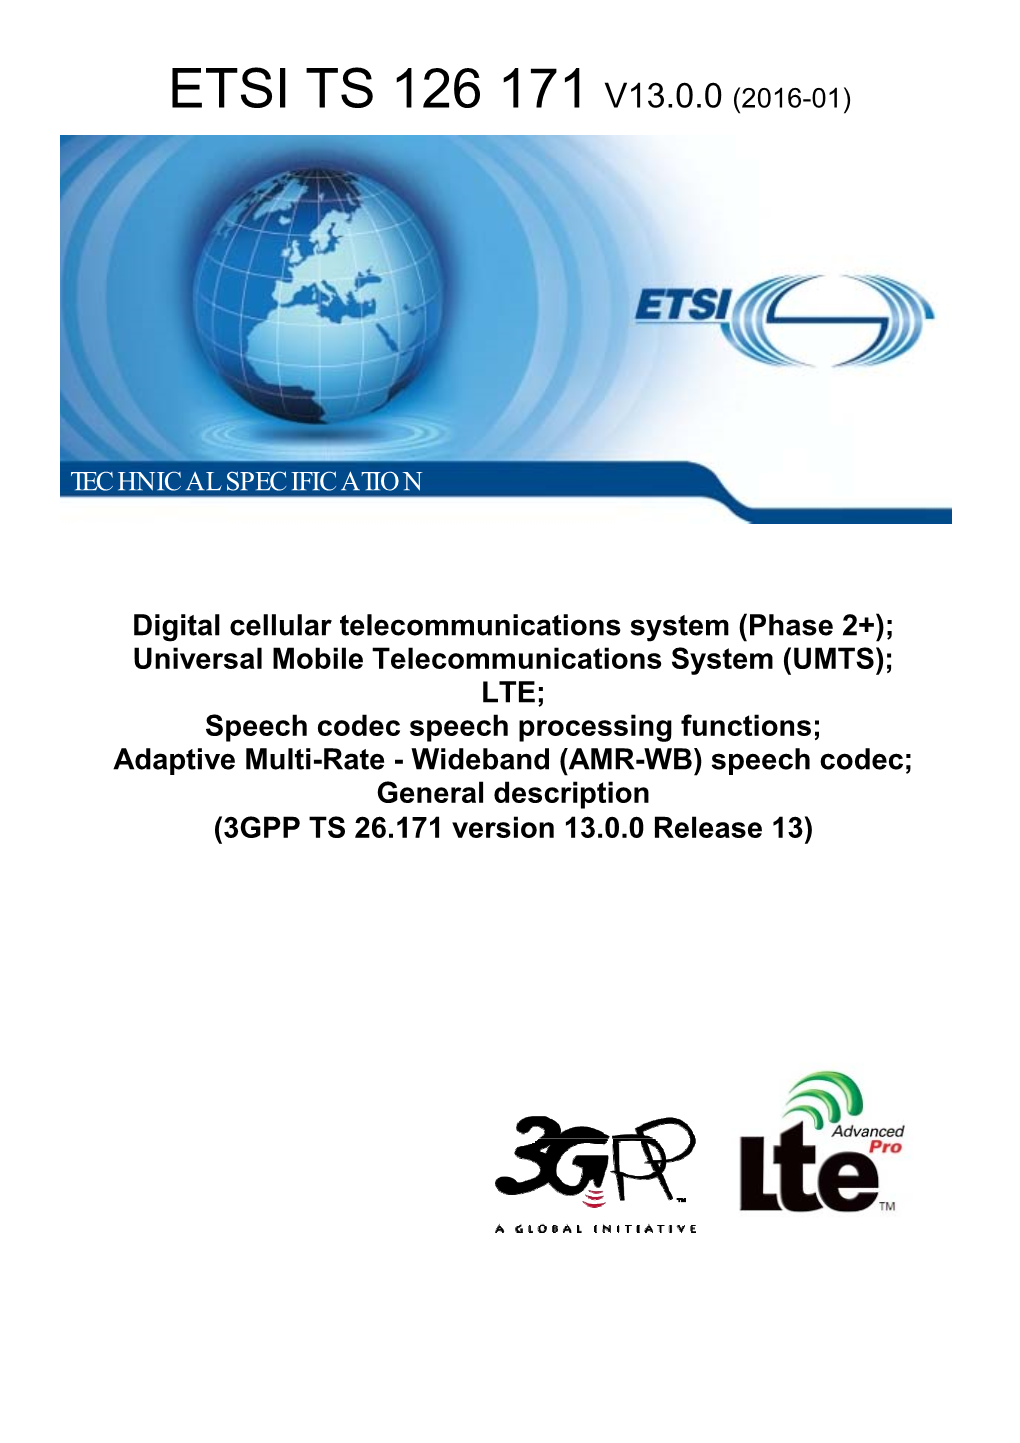 Digital Cellular Telecommunications System (Phase 2); Transmission Planning Aspects of the Speech Service in the GSM Public Land Mobile Network (PLMN) System"